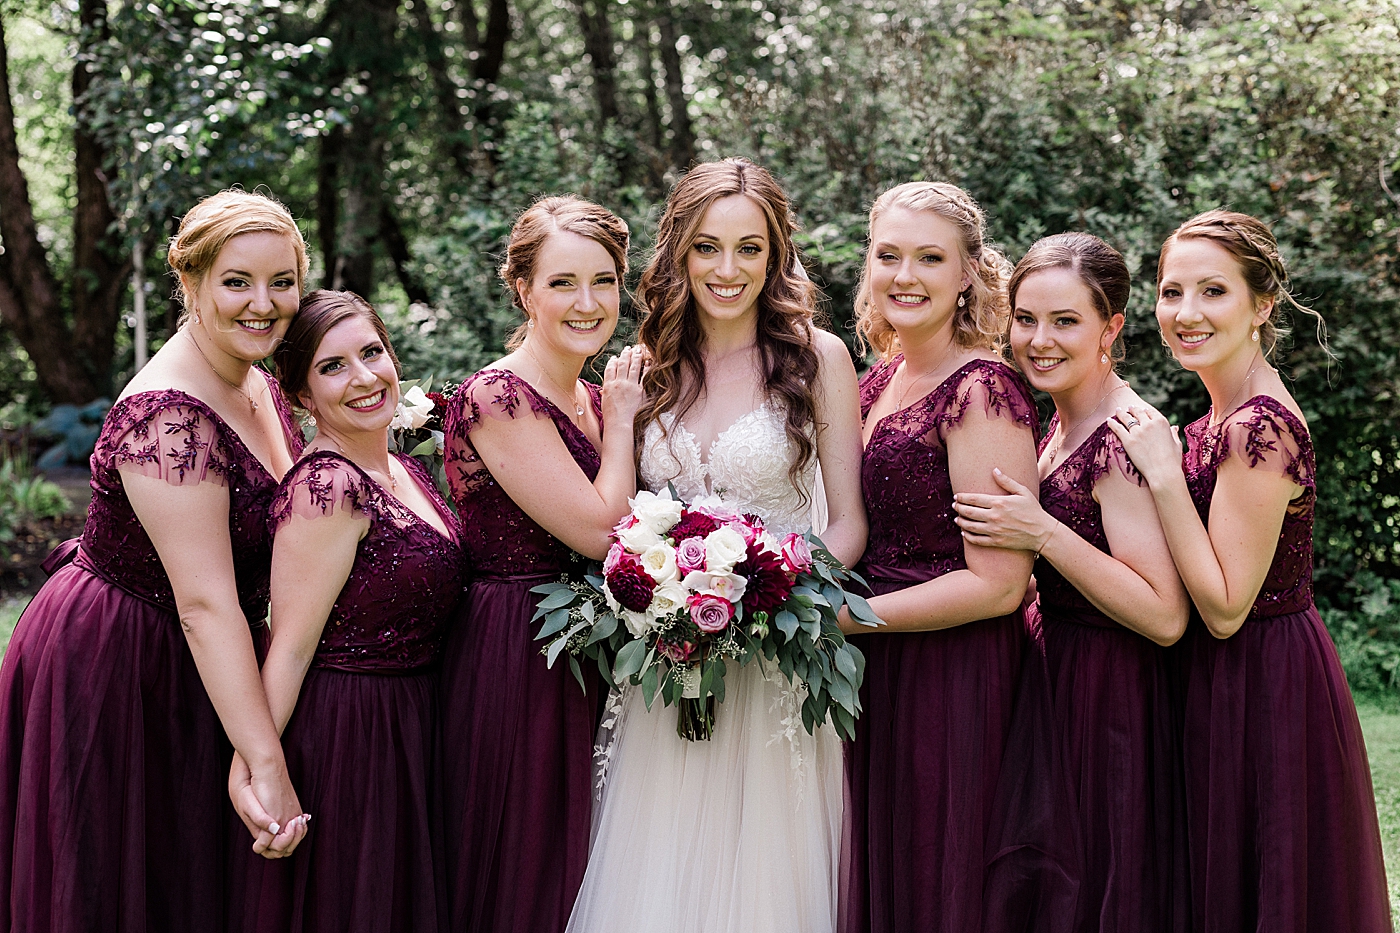 Bridal party wedding photos at Cedar Springs in Port Orchard, WA. Photographed by Tacoma Wedding Photographer, Megan Montalvo Photography. 